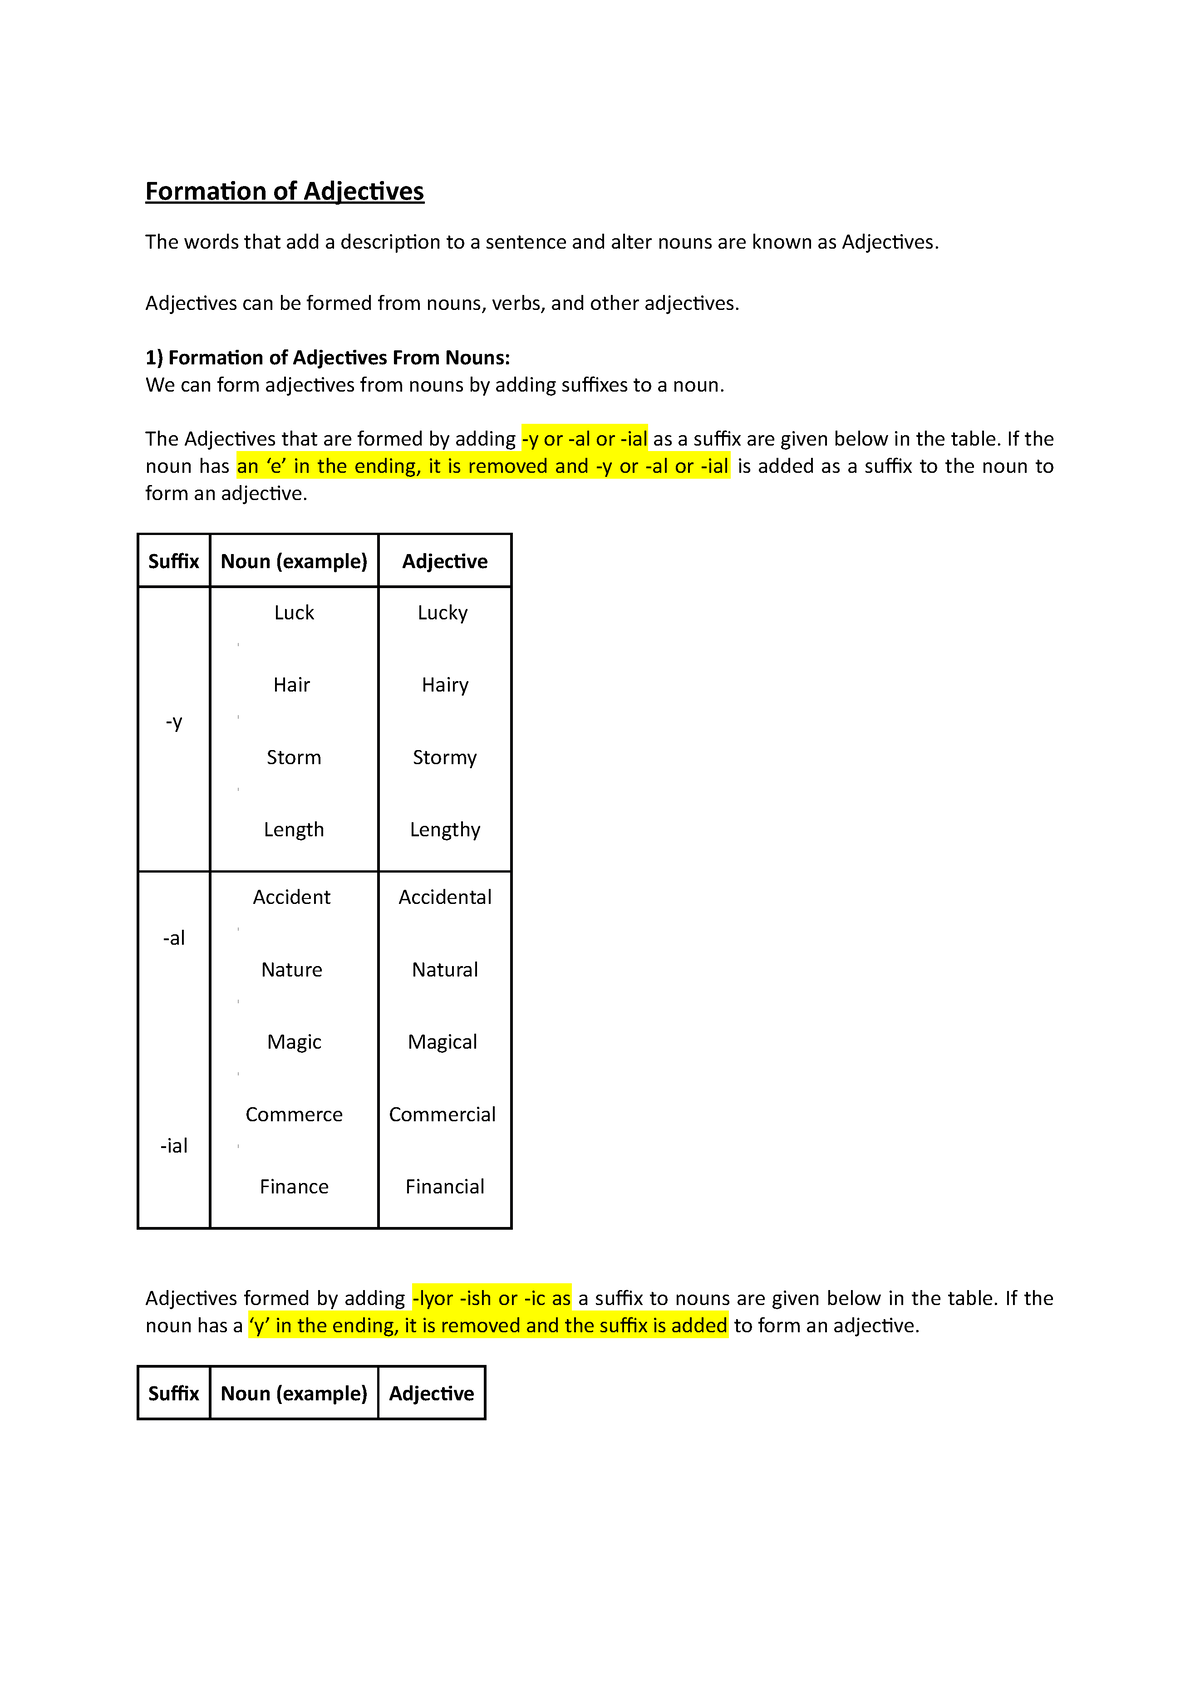 formation-of-adjectives-matilde-1-formation-of-adjectives-the-words-that-add-a-description-to